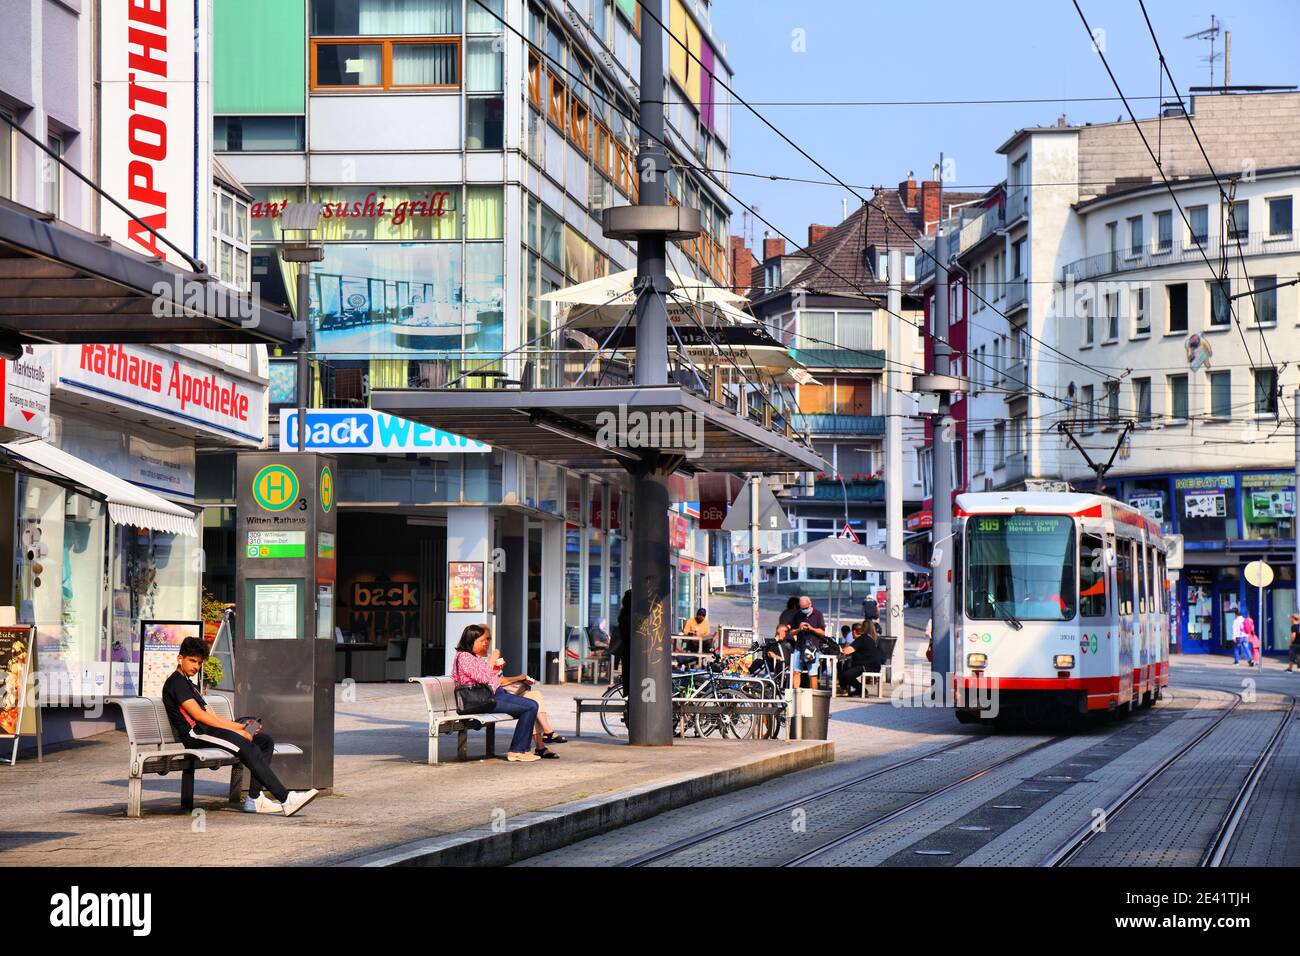 WITTEN, GERMANY - SEPTEMBER 16, 2020: People wait for a tram in downtown  Witten, Germany. Witten is a large town in North-Rhine Westphalia Stock  Photo - Alamy